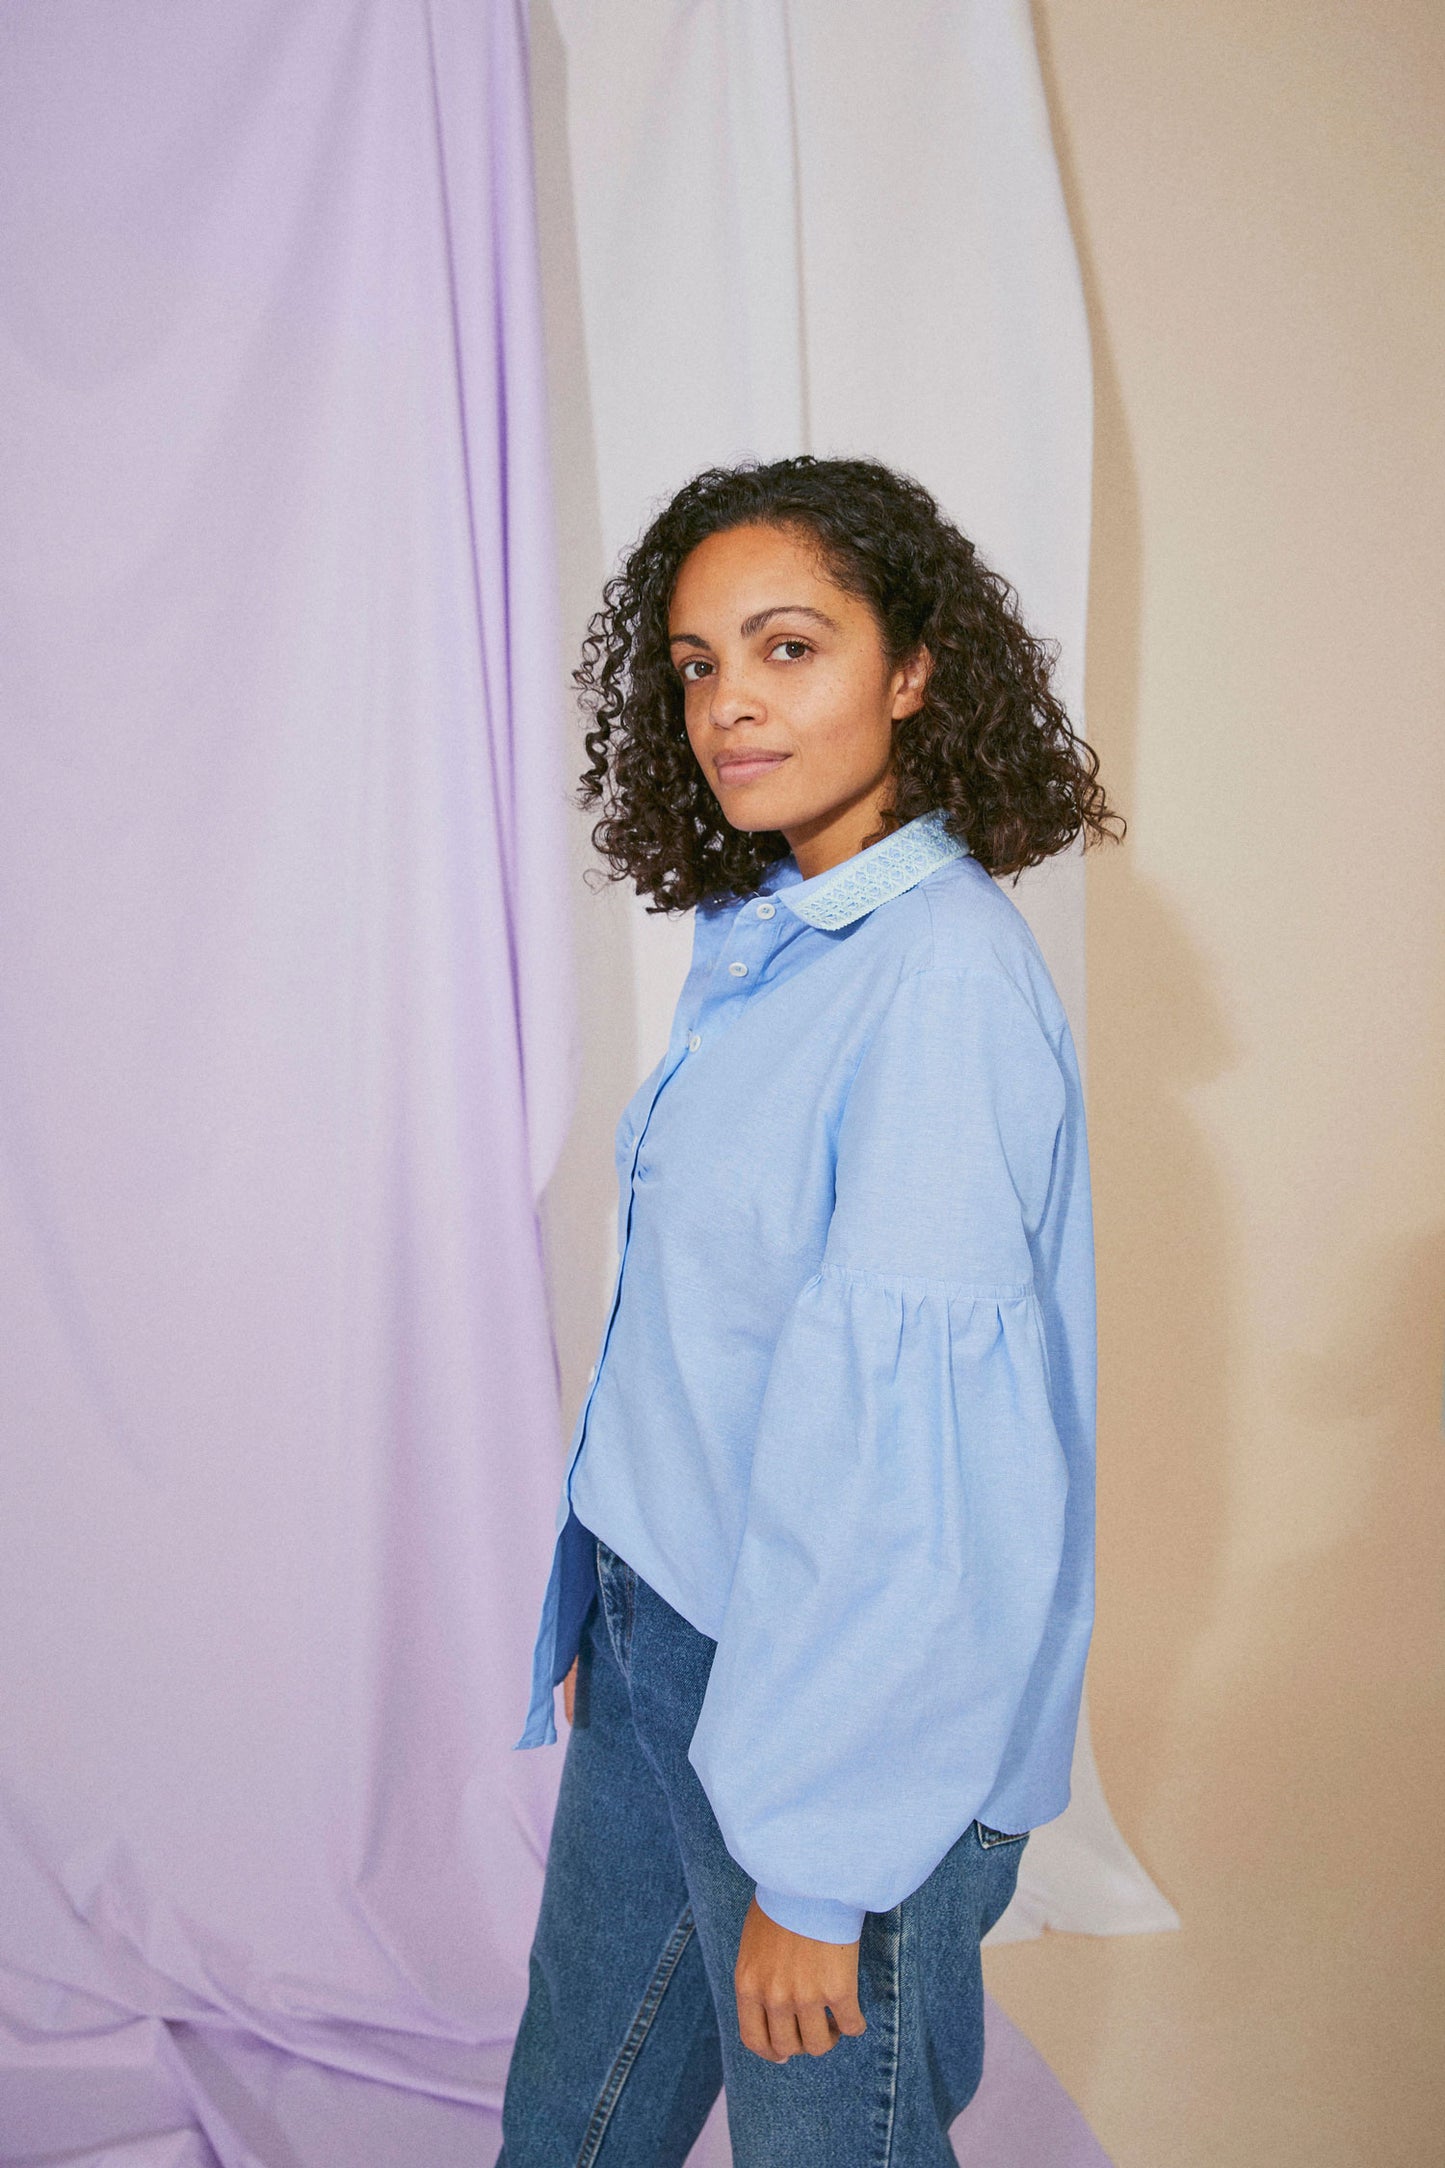 Womens pale blue shirt in recycled cotton, with lace collar trims, volume sleeves, and soft gathers at the bust, side view